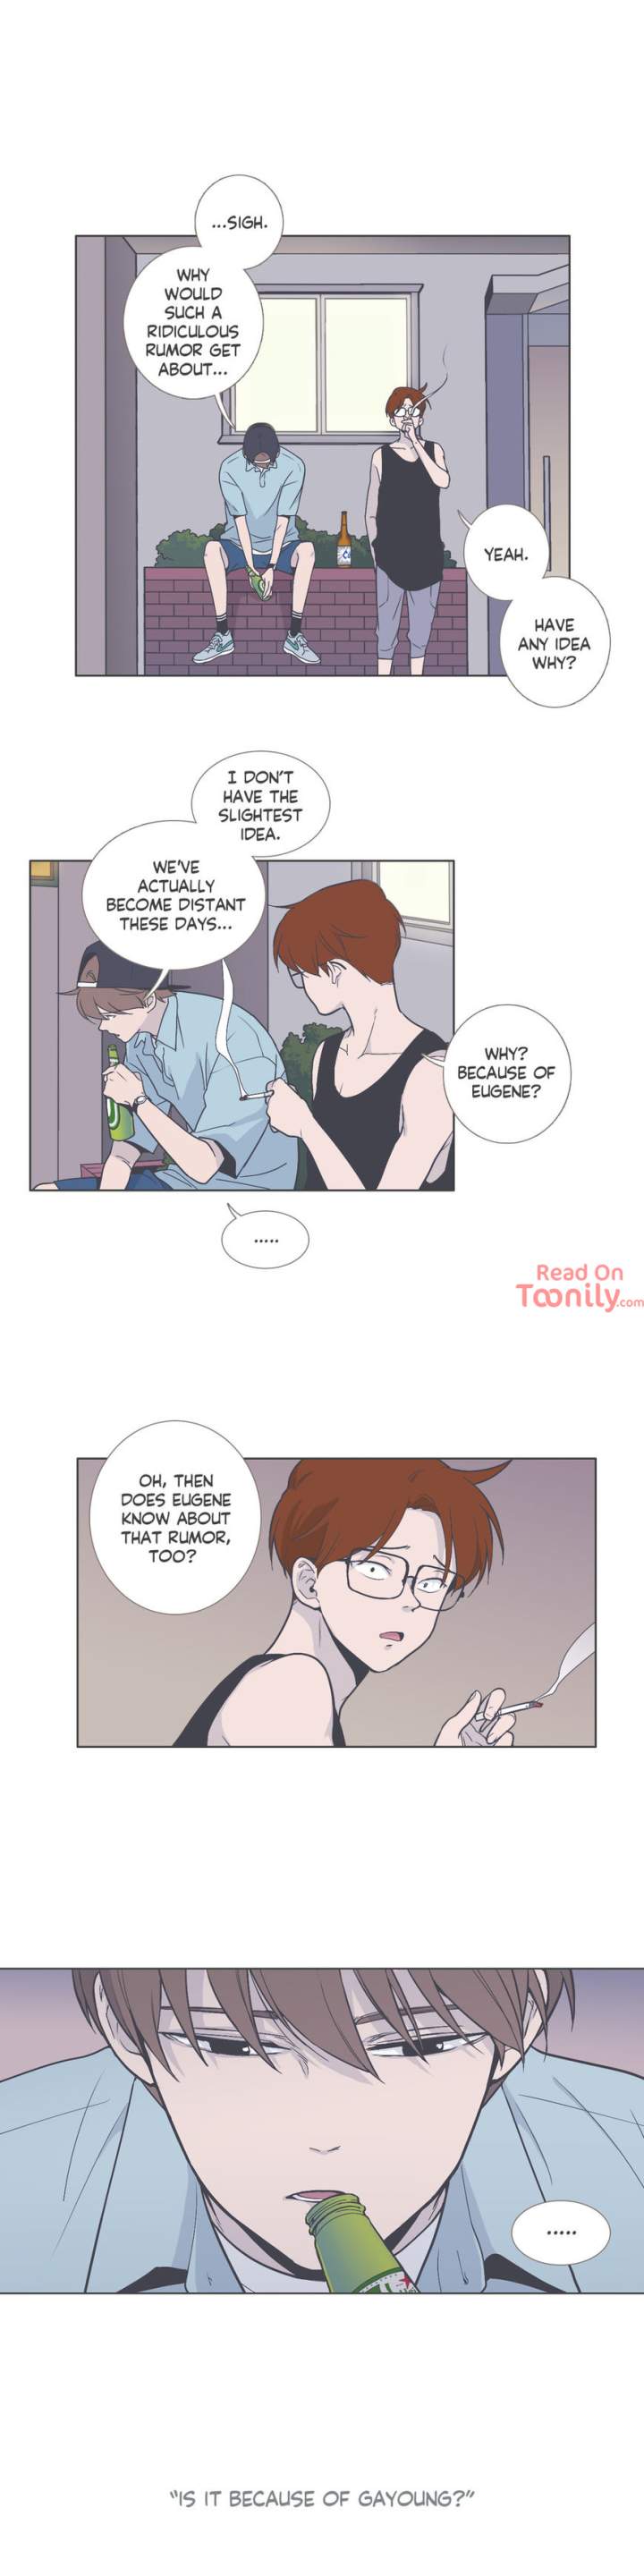 Something About Us - Chapter 45 Page 11